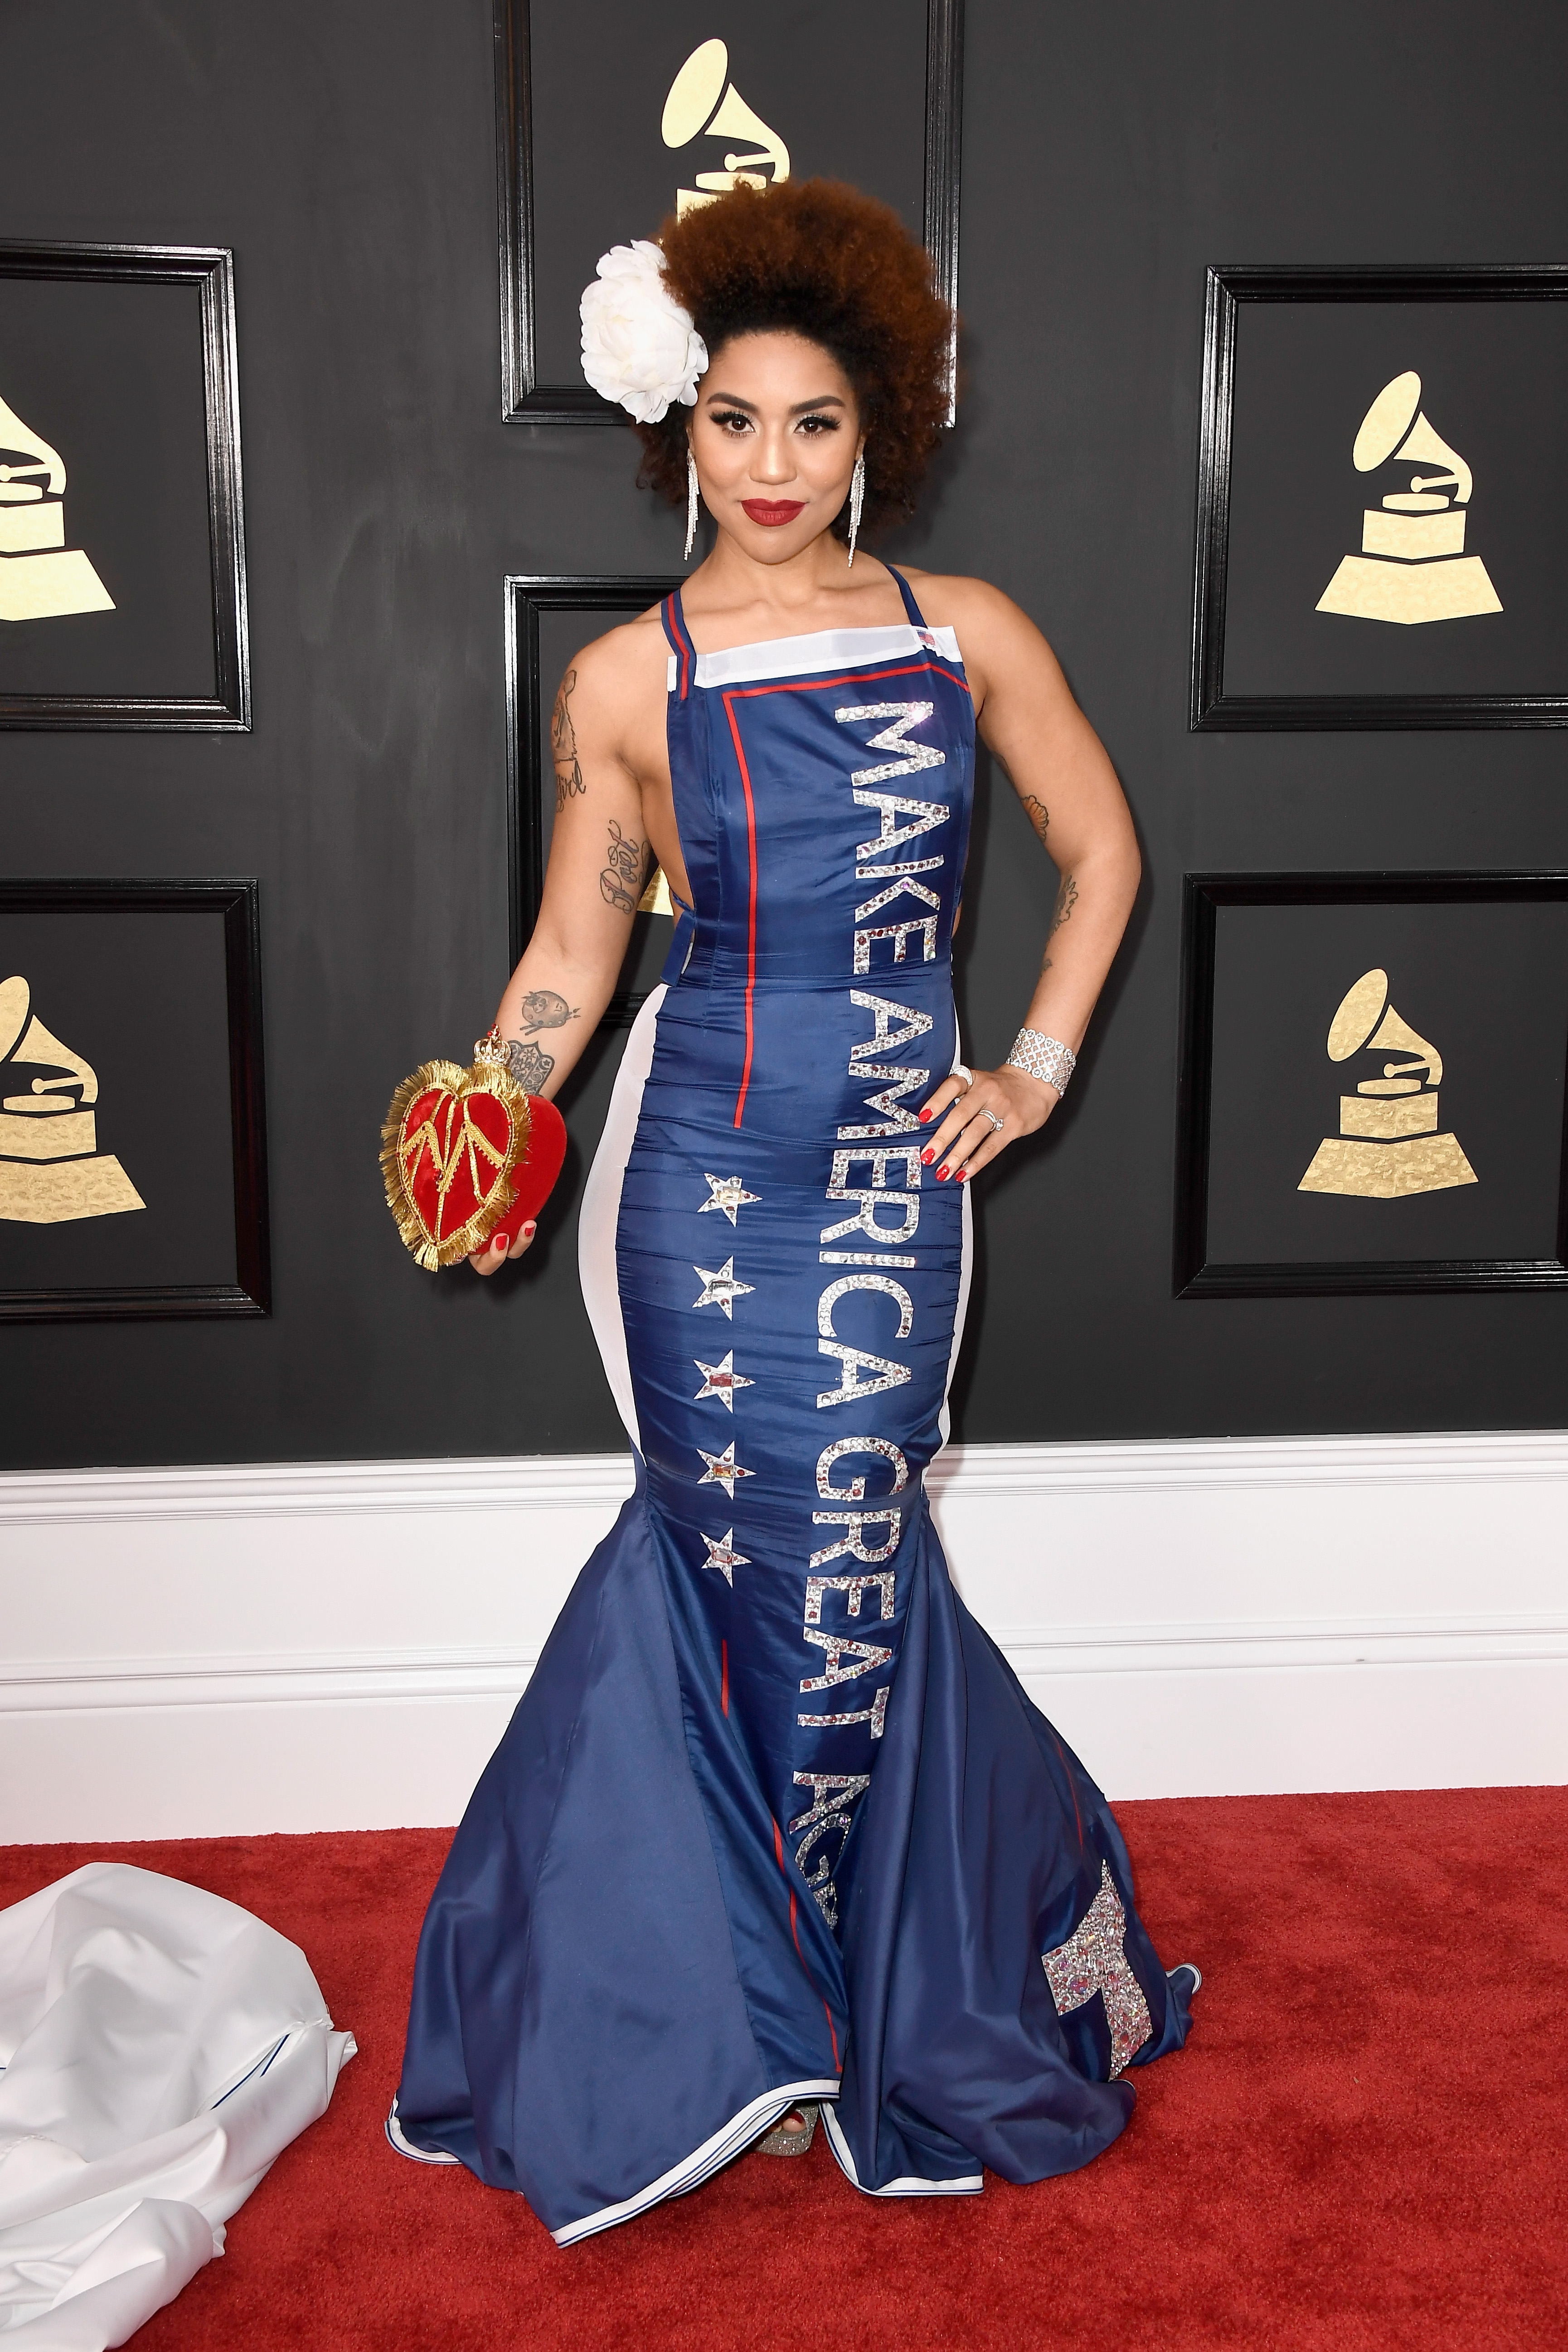 Singer Joy Villa attends The 59th GRAMMY Awards at STAPLES Center on February 12, 2017 in Los Angeles, California. Photo by Frazer Harrison/Getty Images